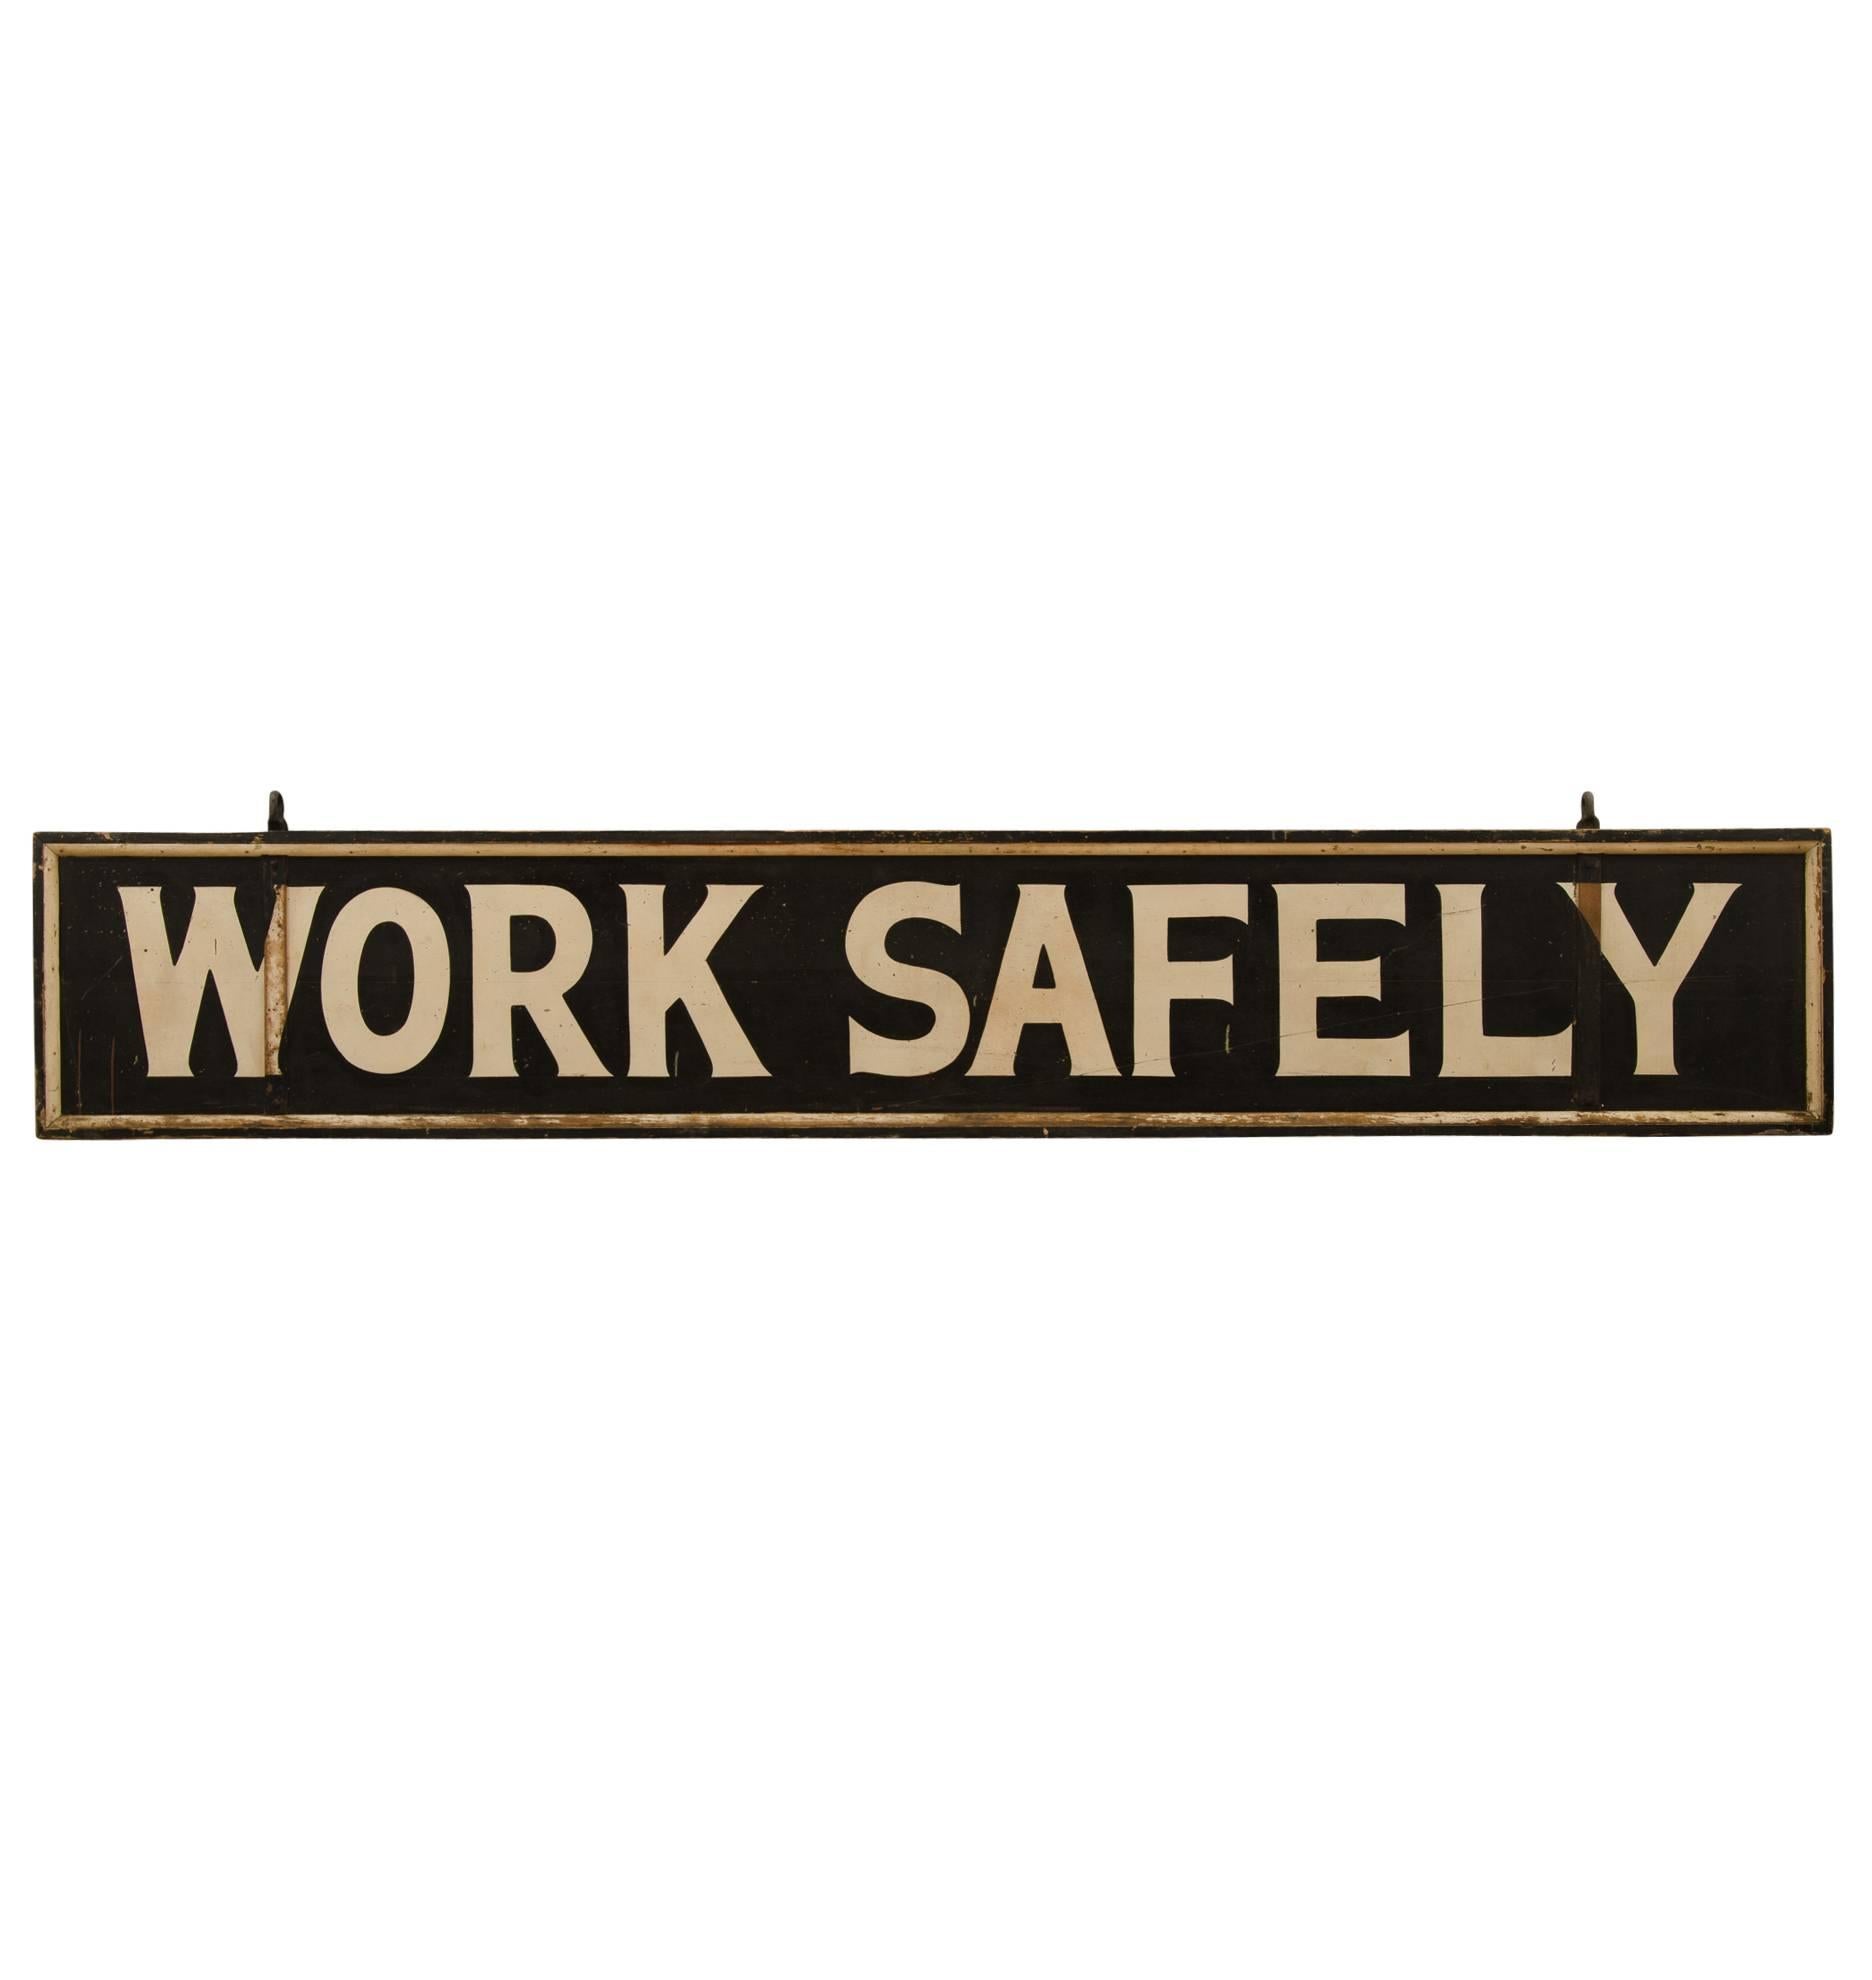 Industrial Enormous Hand-Painted Work Safely Sign, circa 1900s